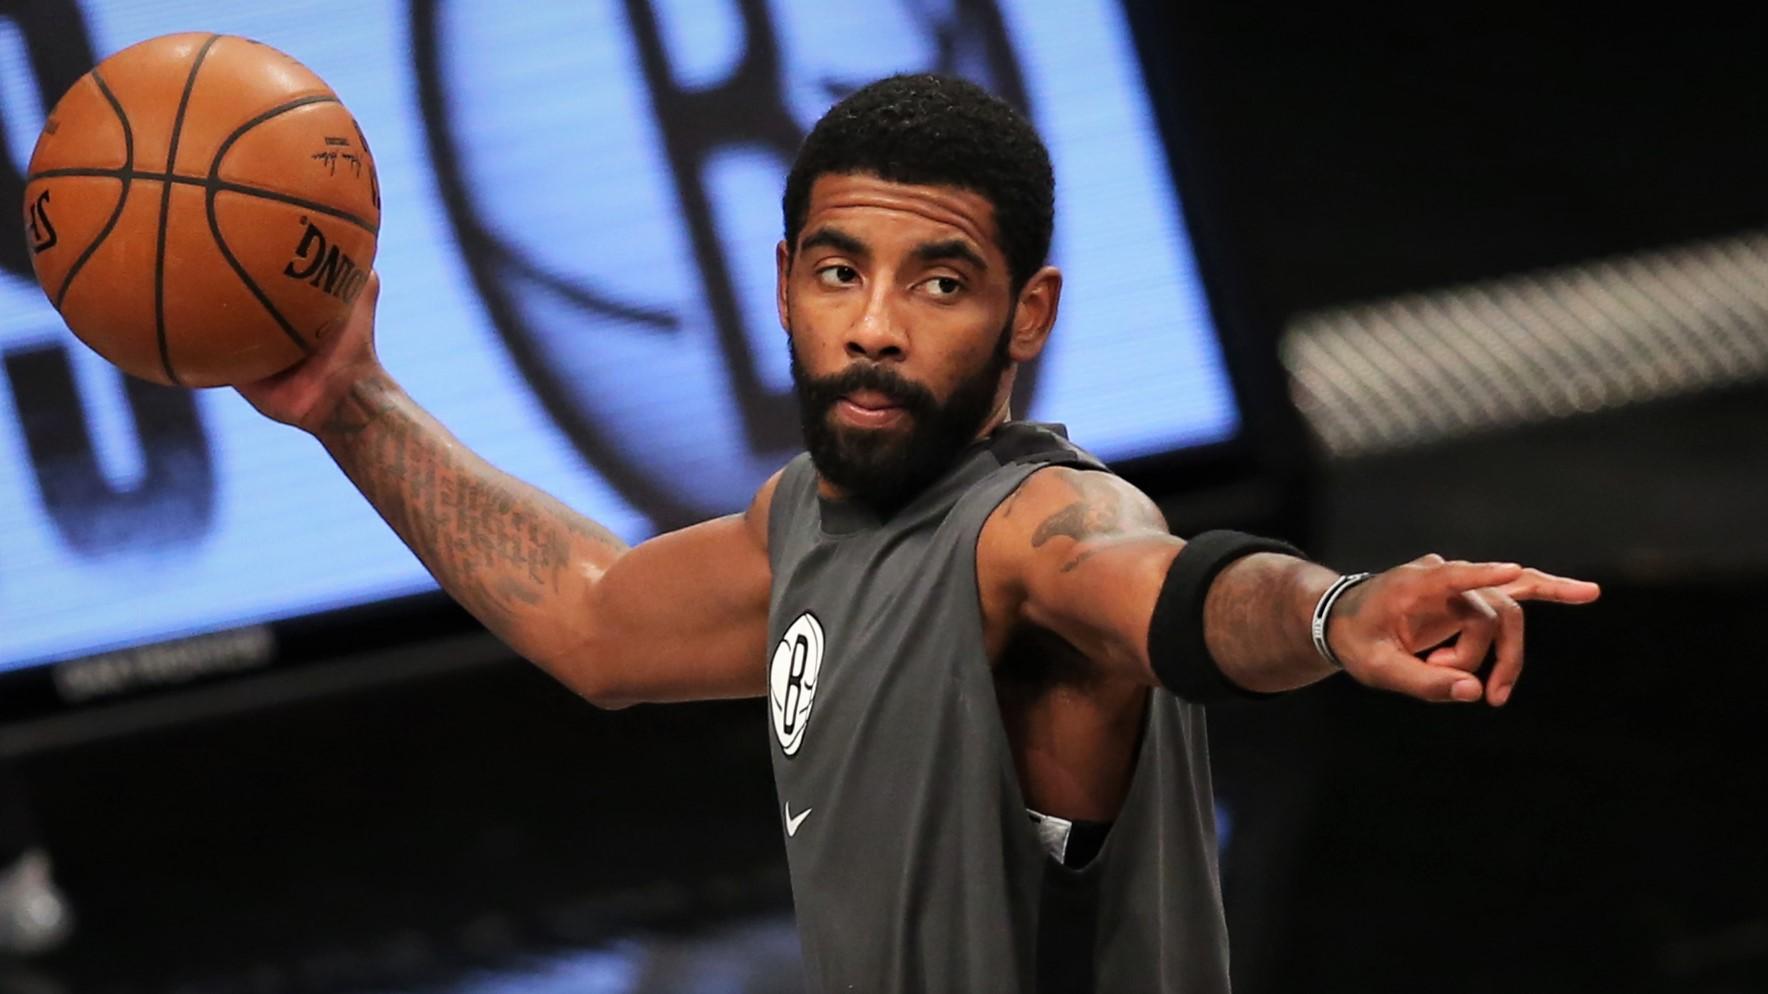 Jan 1, 2021; Brooklyn, New York, USA; Brooklyn Nets point guard Kyrie Irving (11) warms up before a game against the Atlanta Hawks at Barclays Center. Mandatory Credit: Brad Penner-USA TODAY Sports / © Brad Penner-USA TODAY Sports